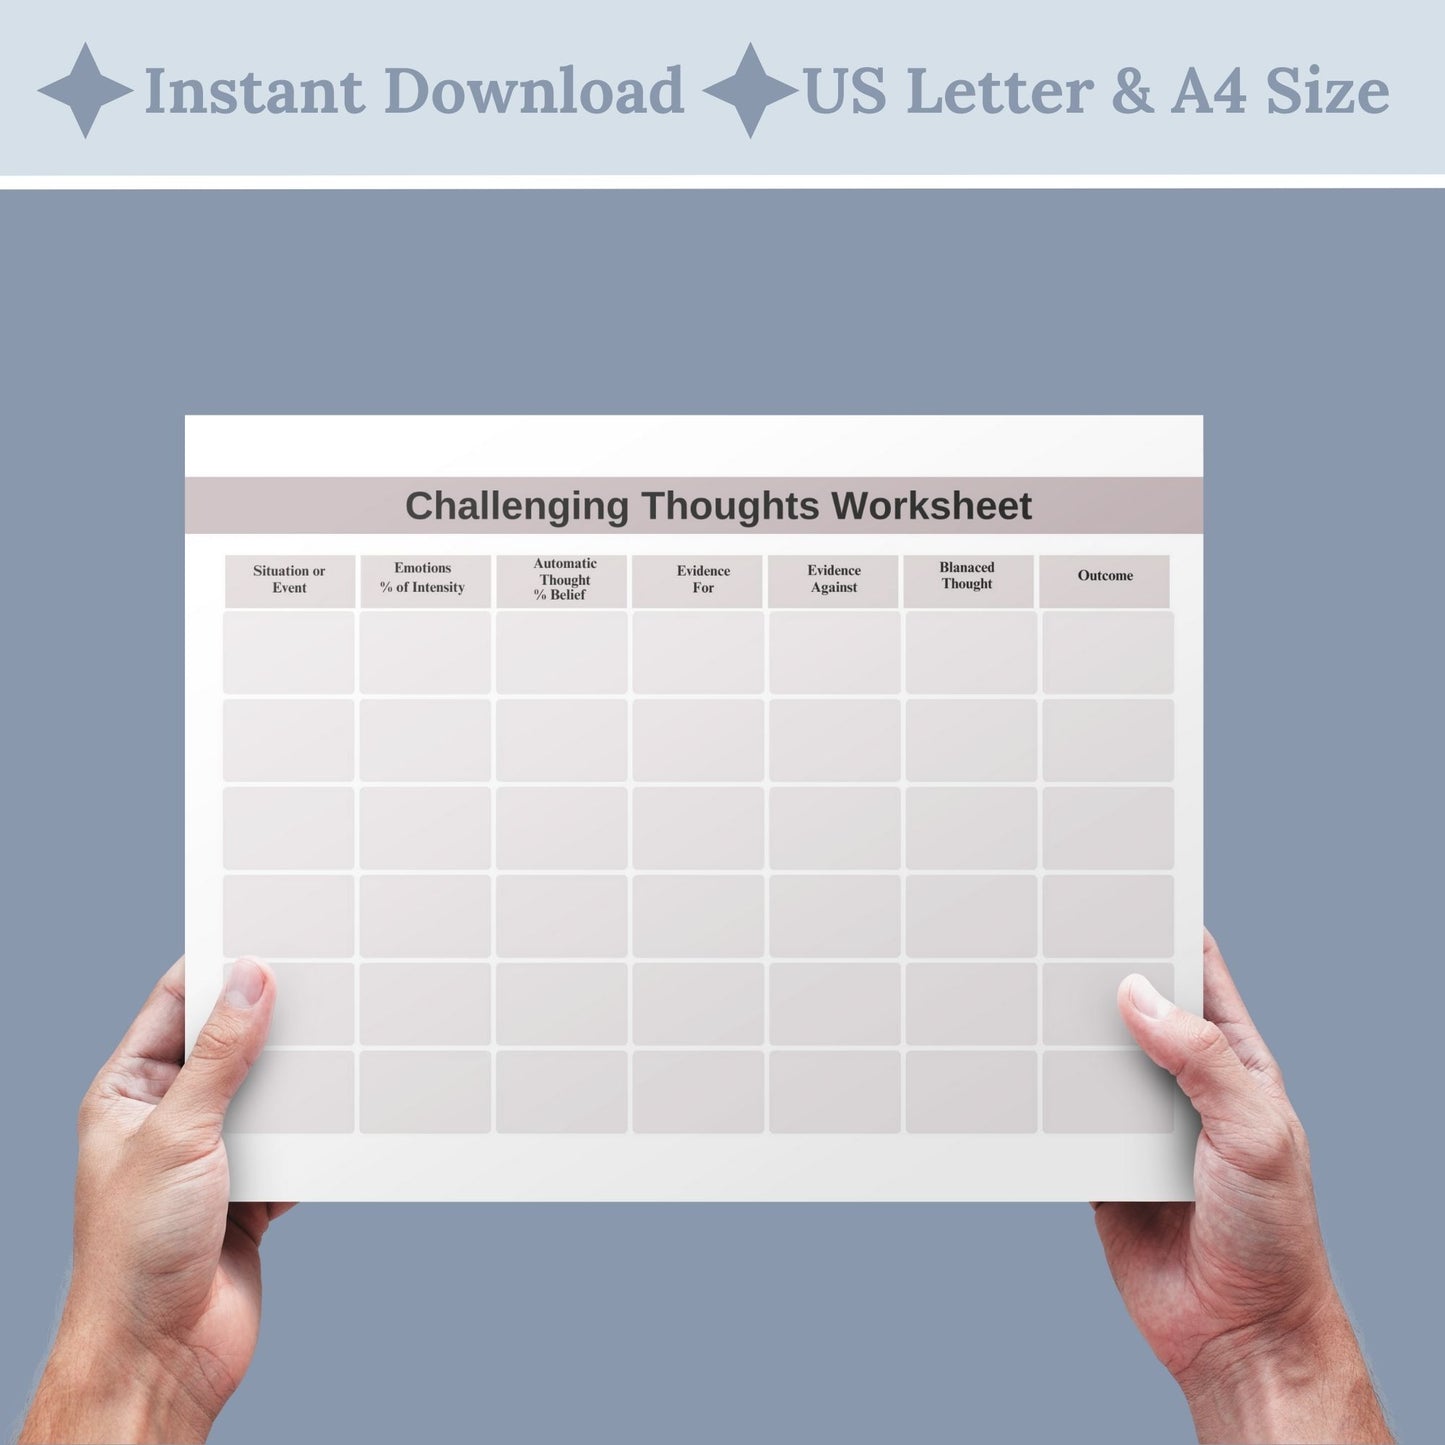 CBT Therapy Worksheets – a therapy tool for tackling negative thoughts. This mental health CBT worksheet merges psychotherapy and cognitive behavior techniques, addressing cognitive distortions and negative thought patterns.